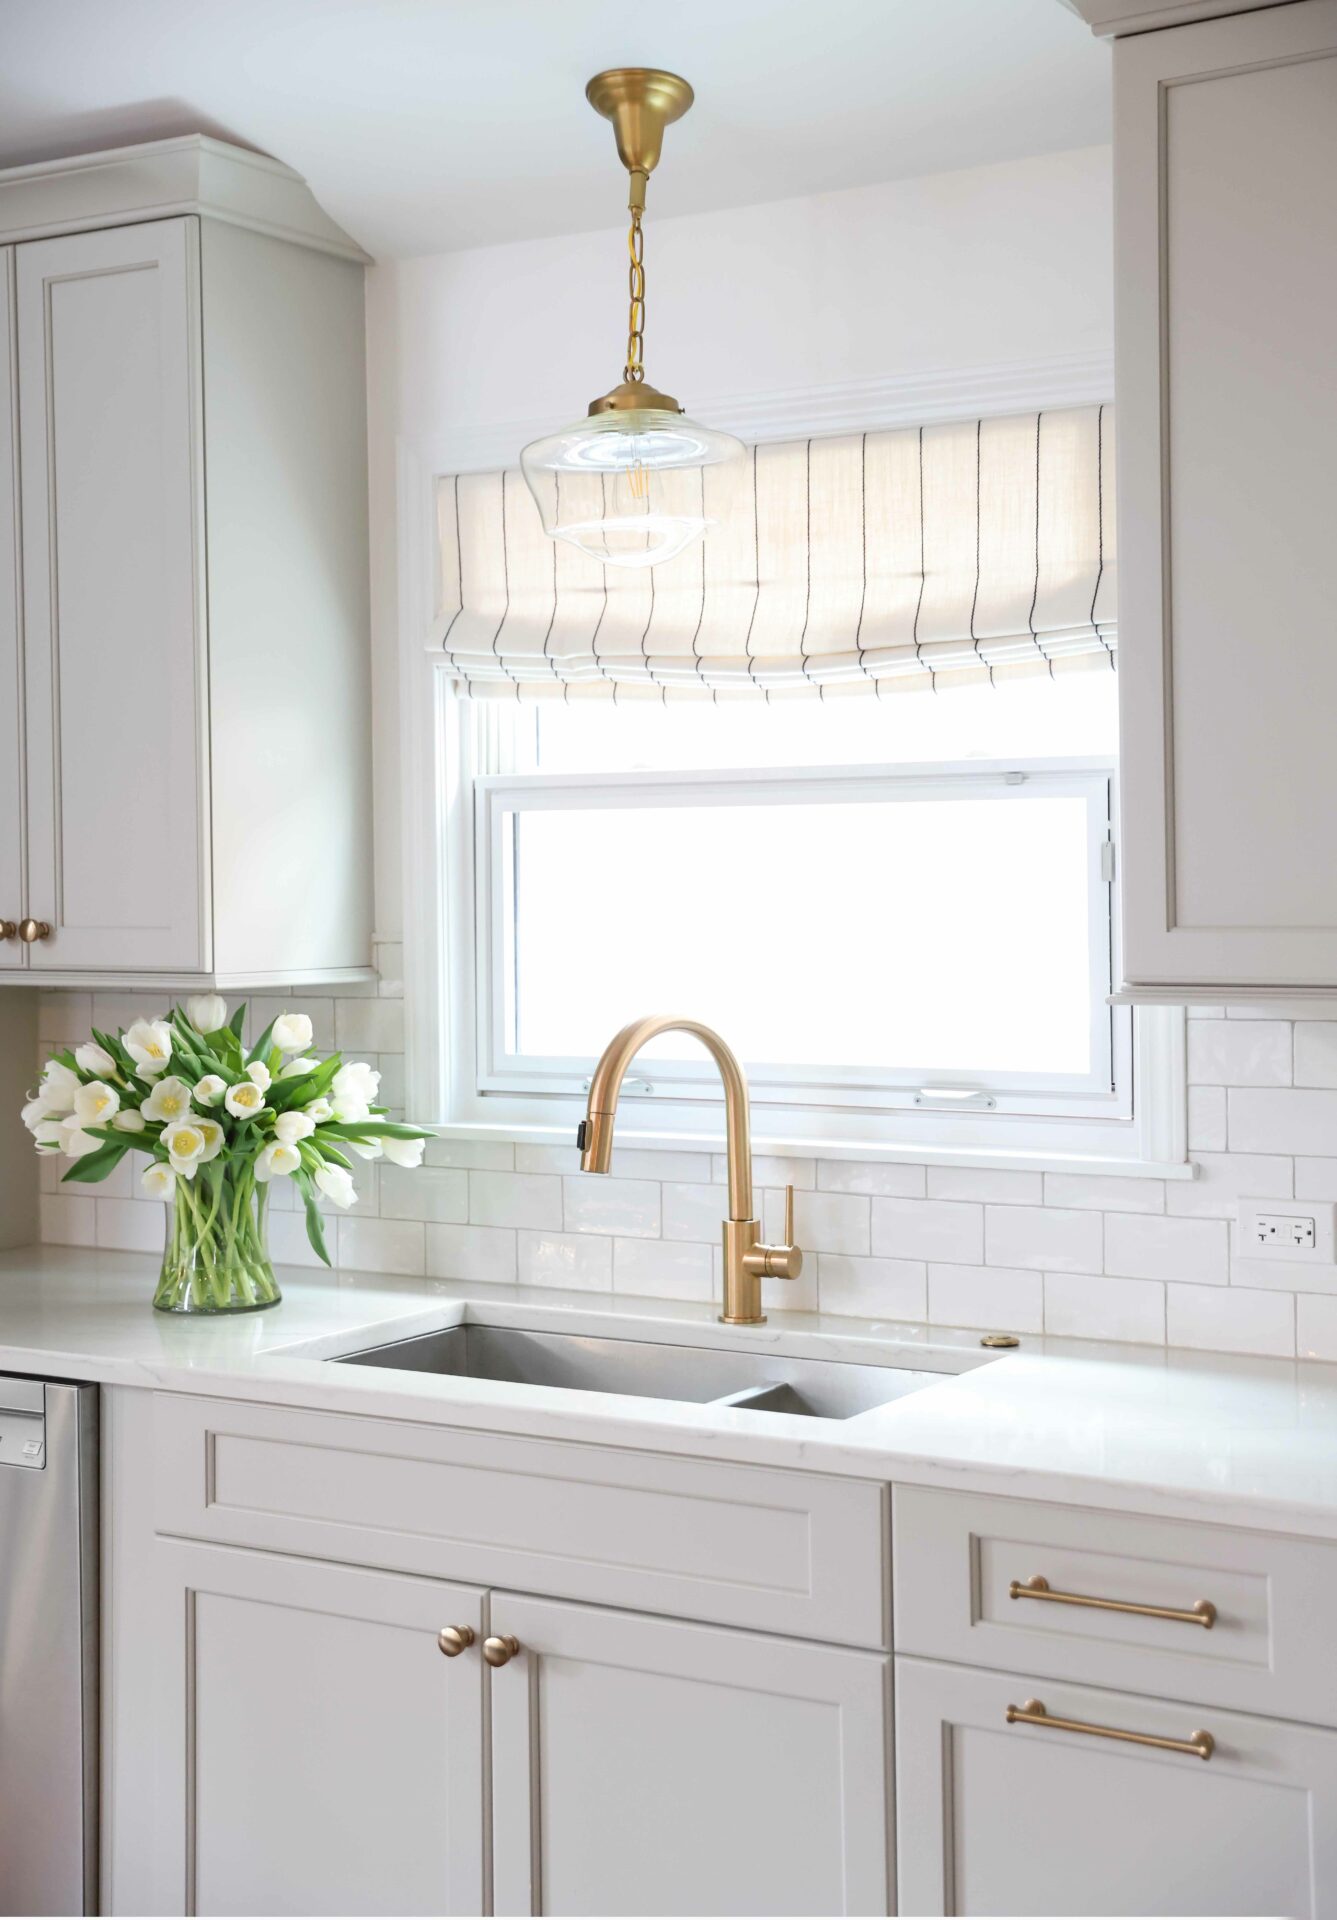 Light gray kitchen cabinets with gold tone faucet